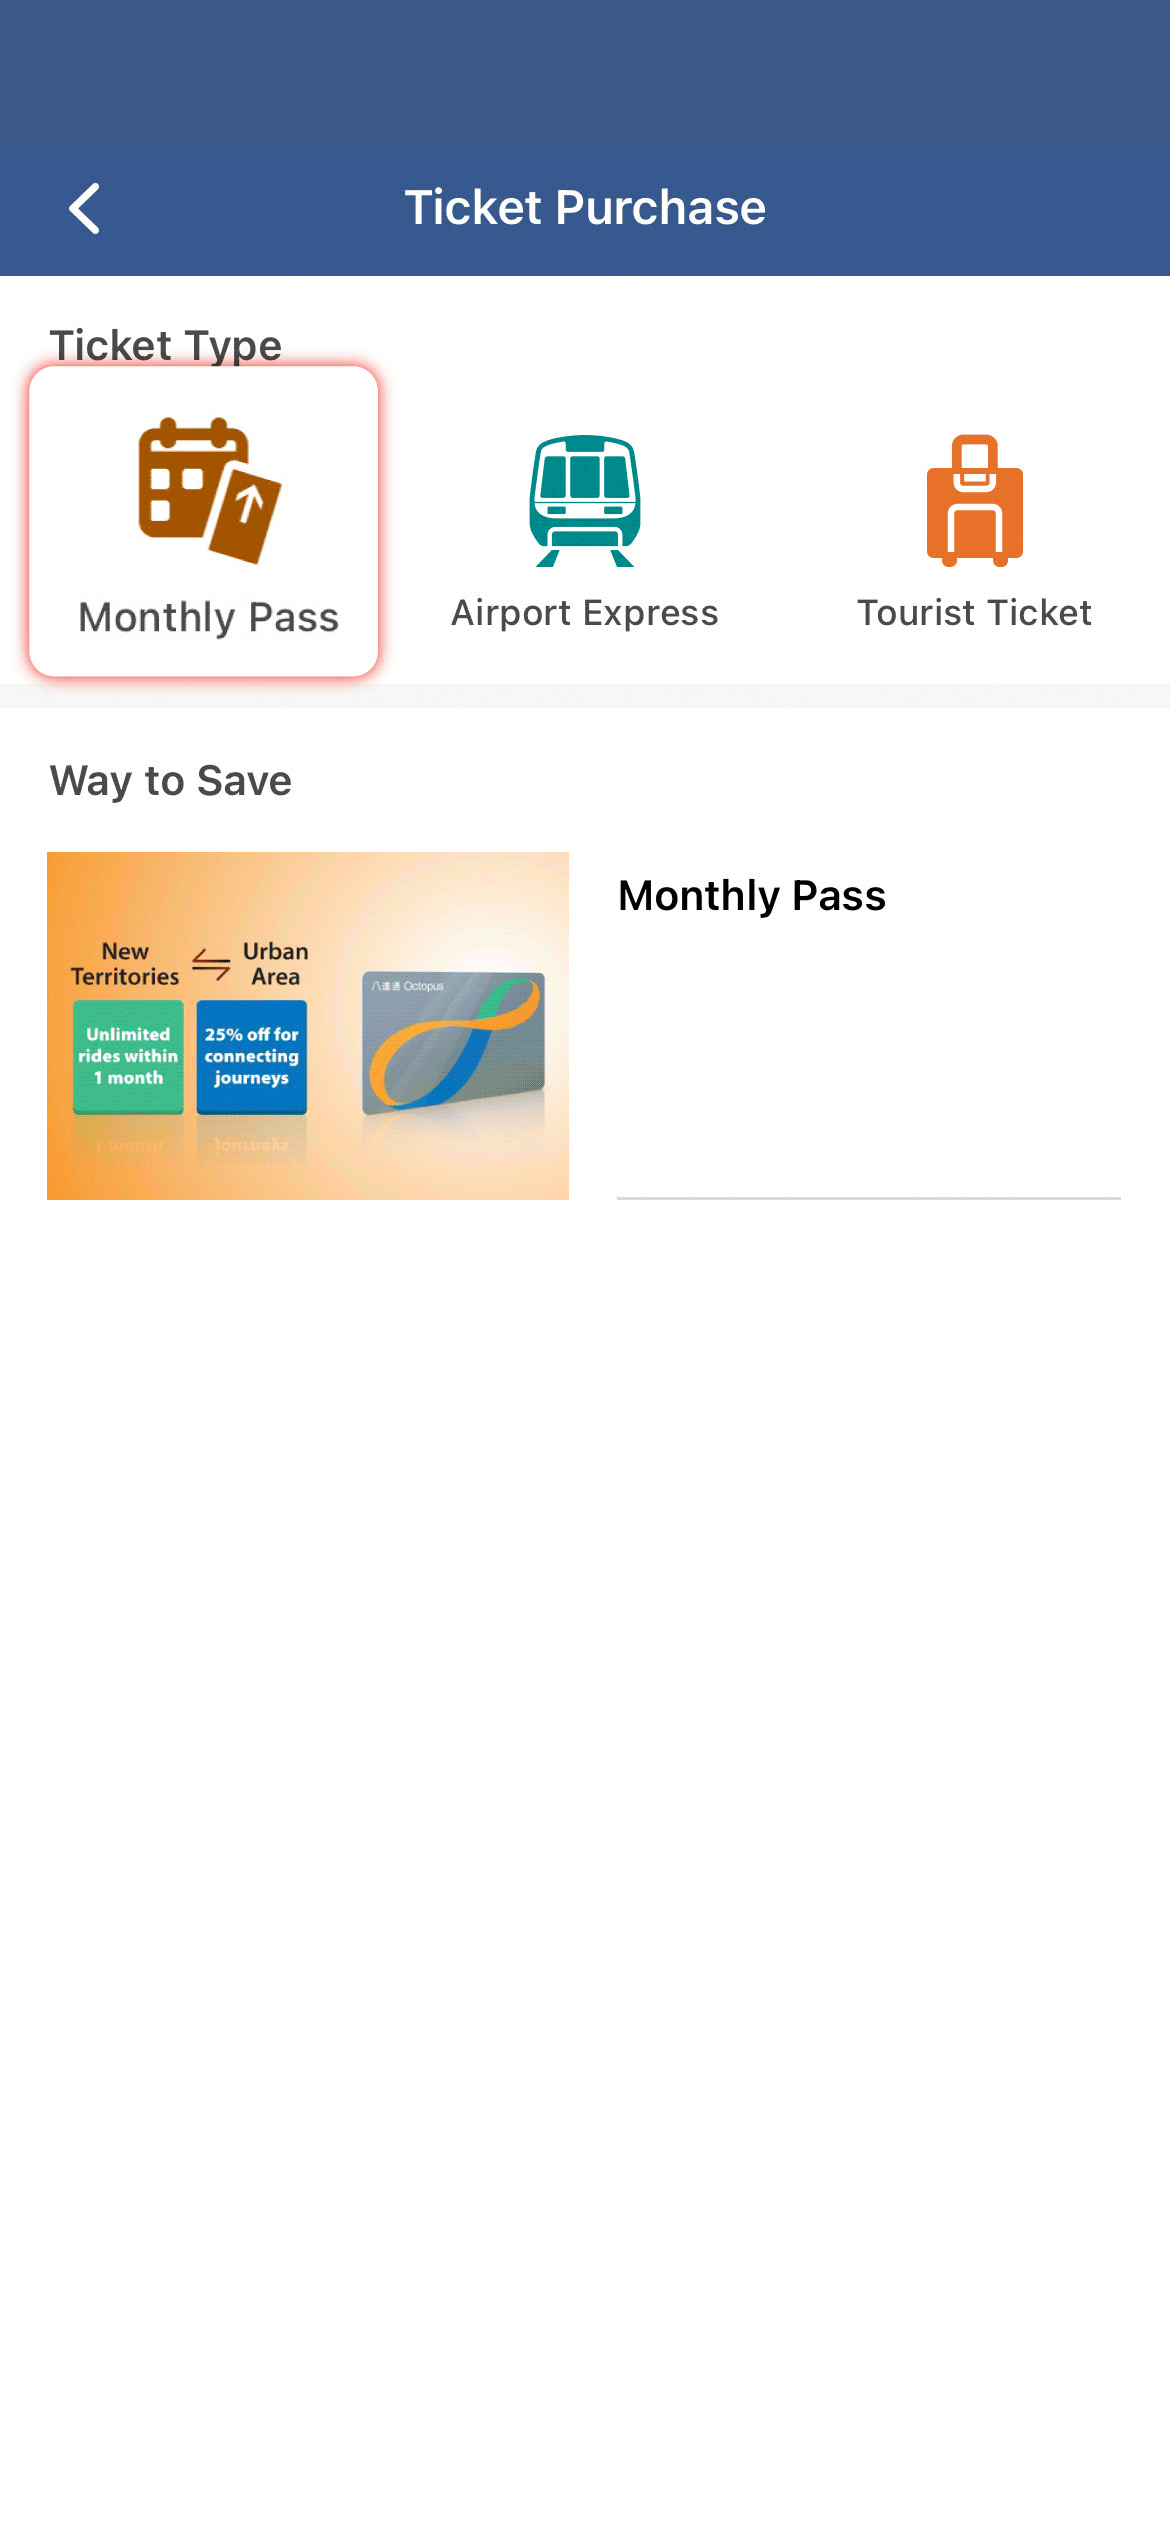 Select the Monthly Pass you need